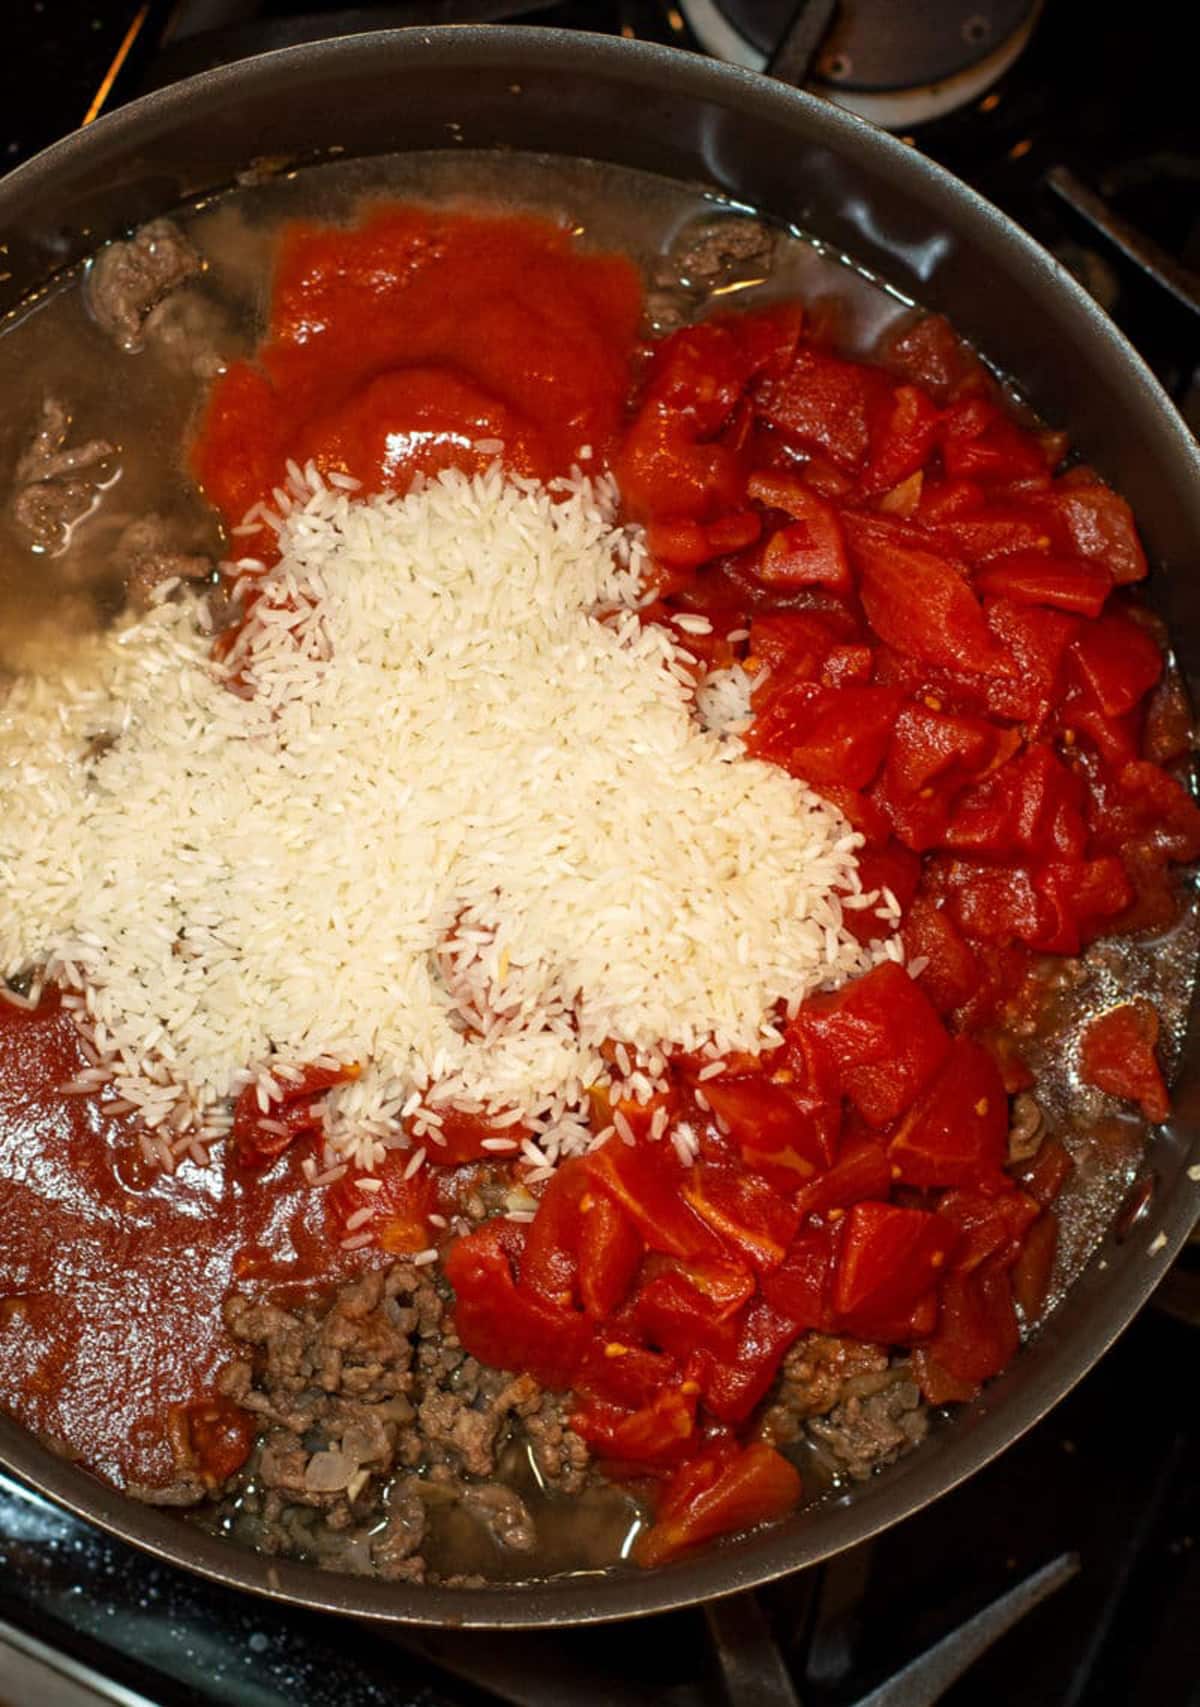 Pot containing diced tomatoes, tomato sauce, rice, and ground beef.